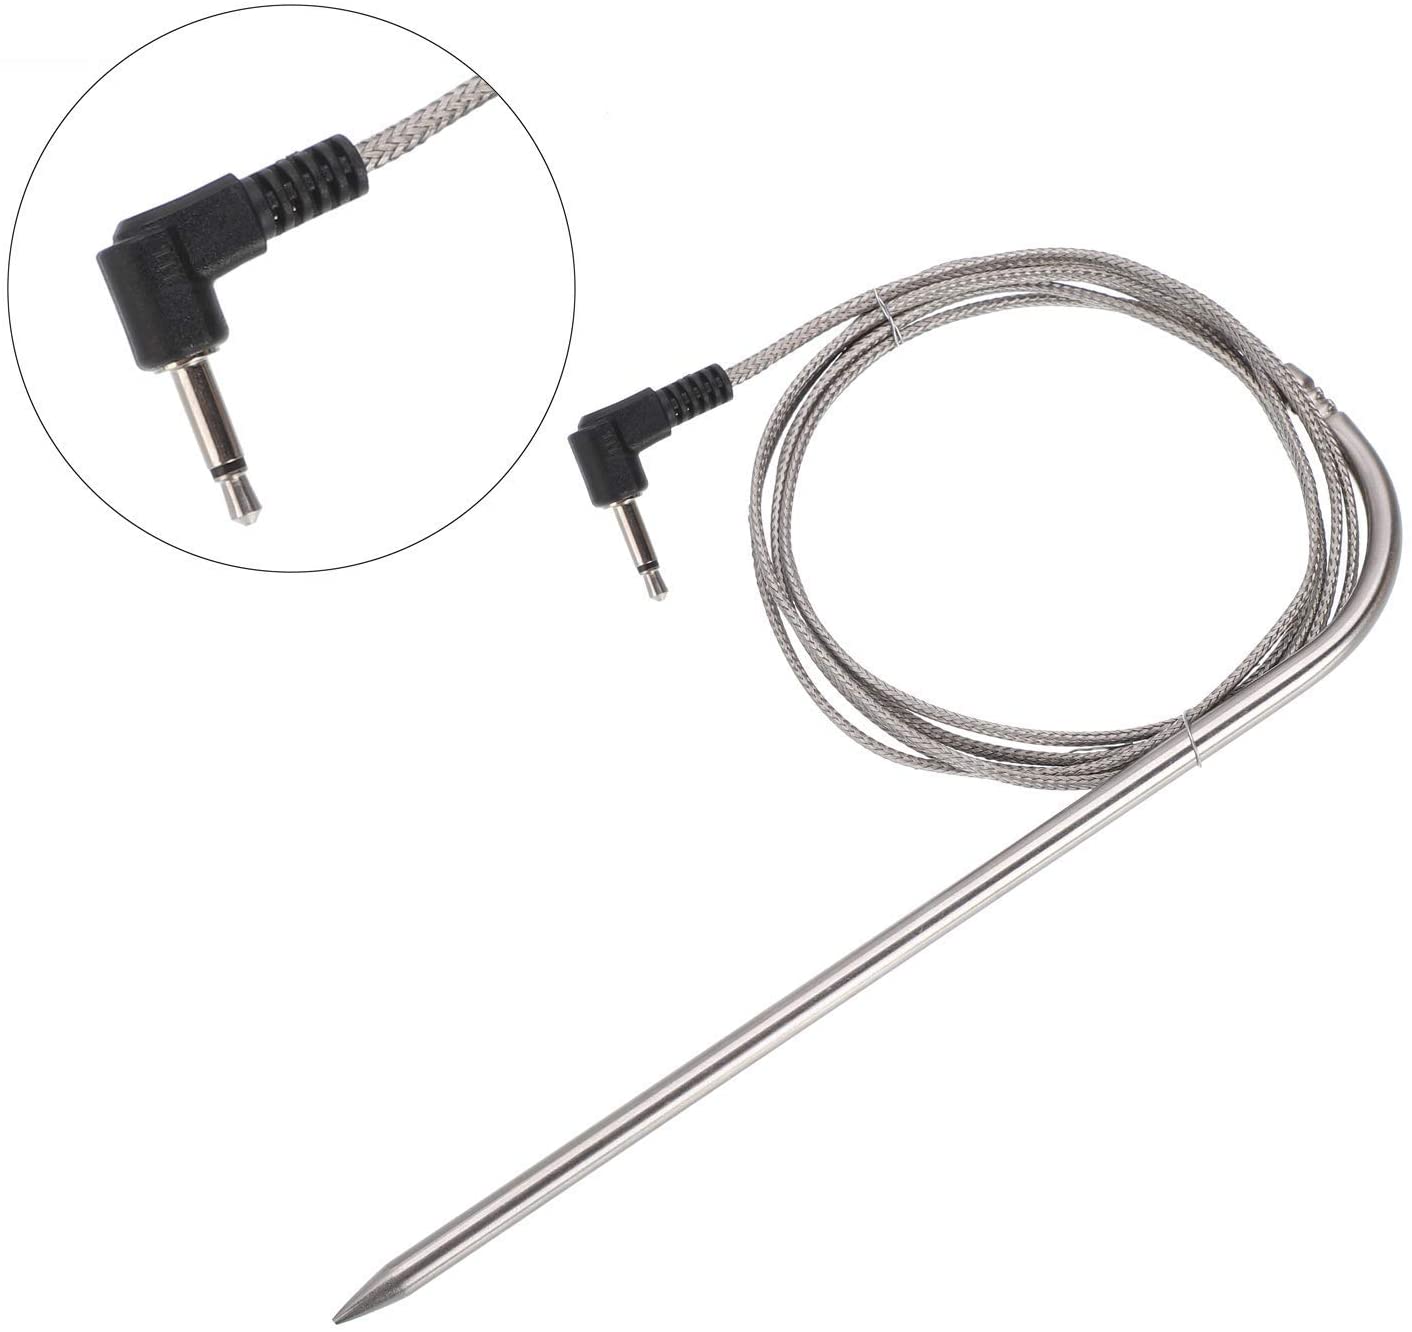 3.5mm Plug Meat Probe for Pit Boss 3 Series Vertical Smoker (PBV3P1) Grills, Replacement High Temperature BBQ Digital Thermostat Meat Probes